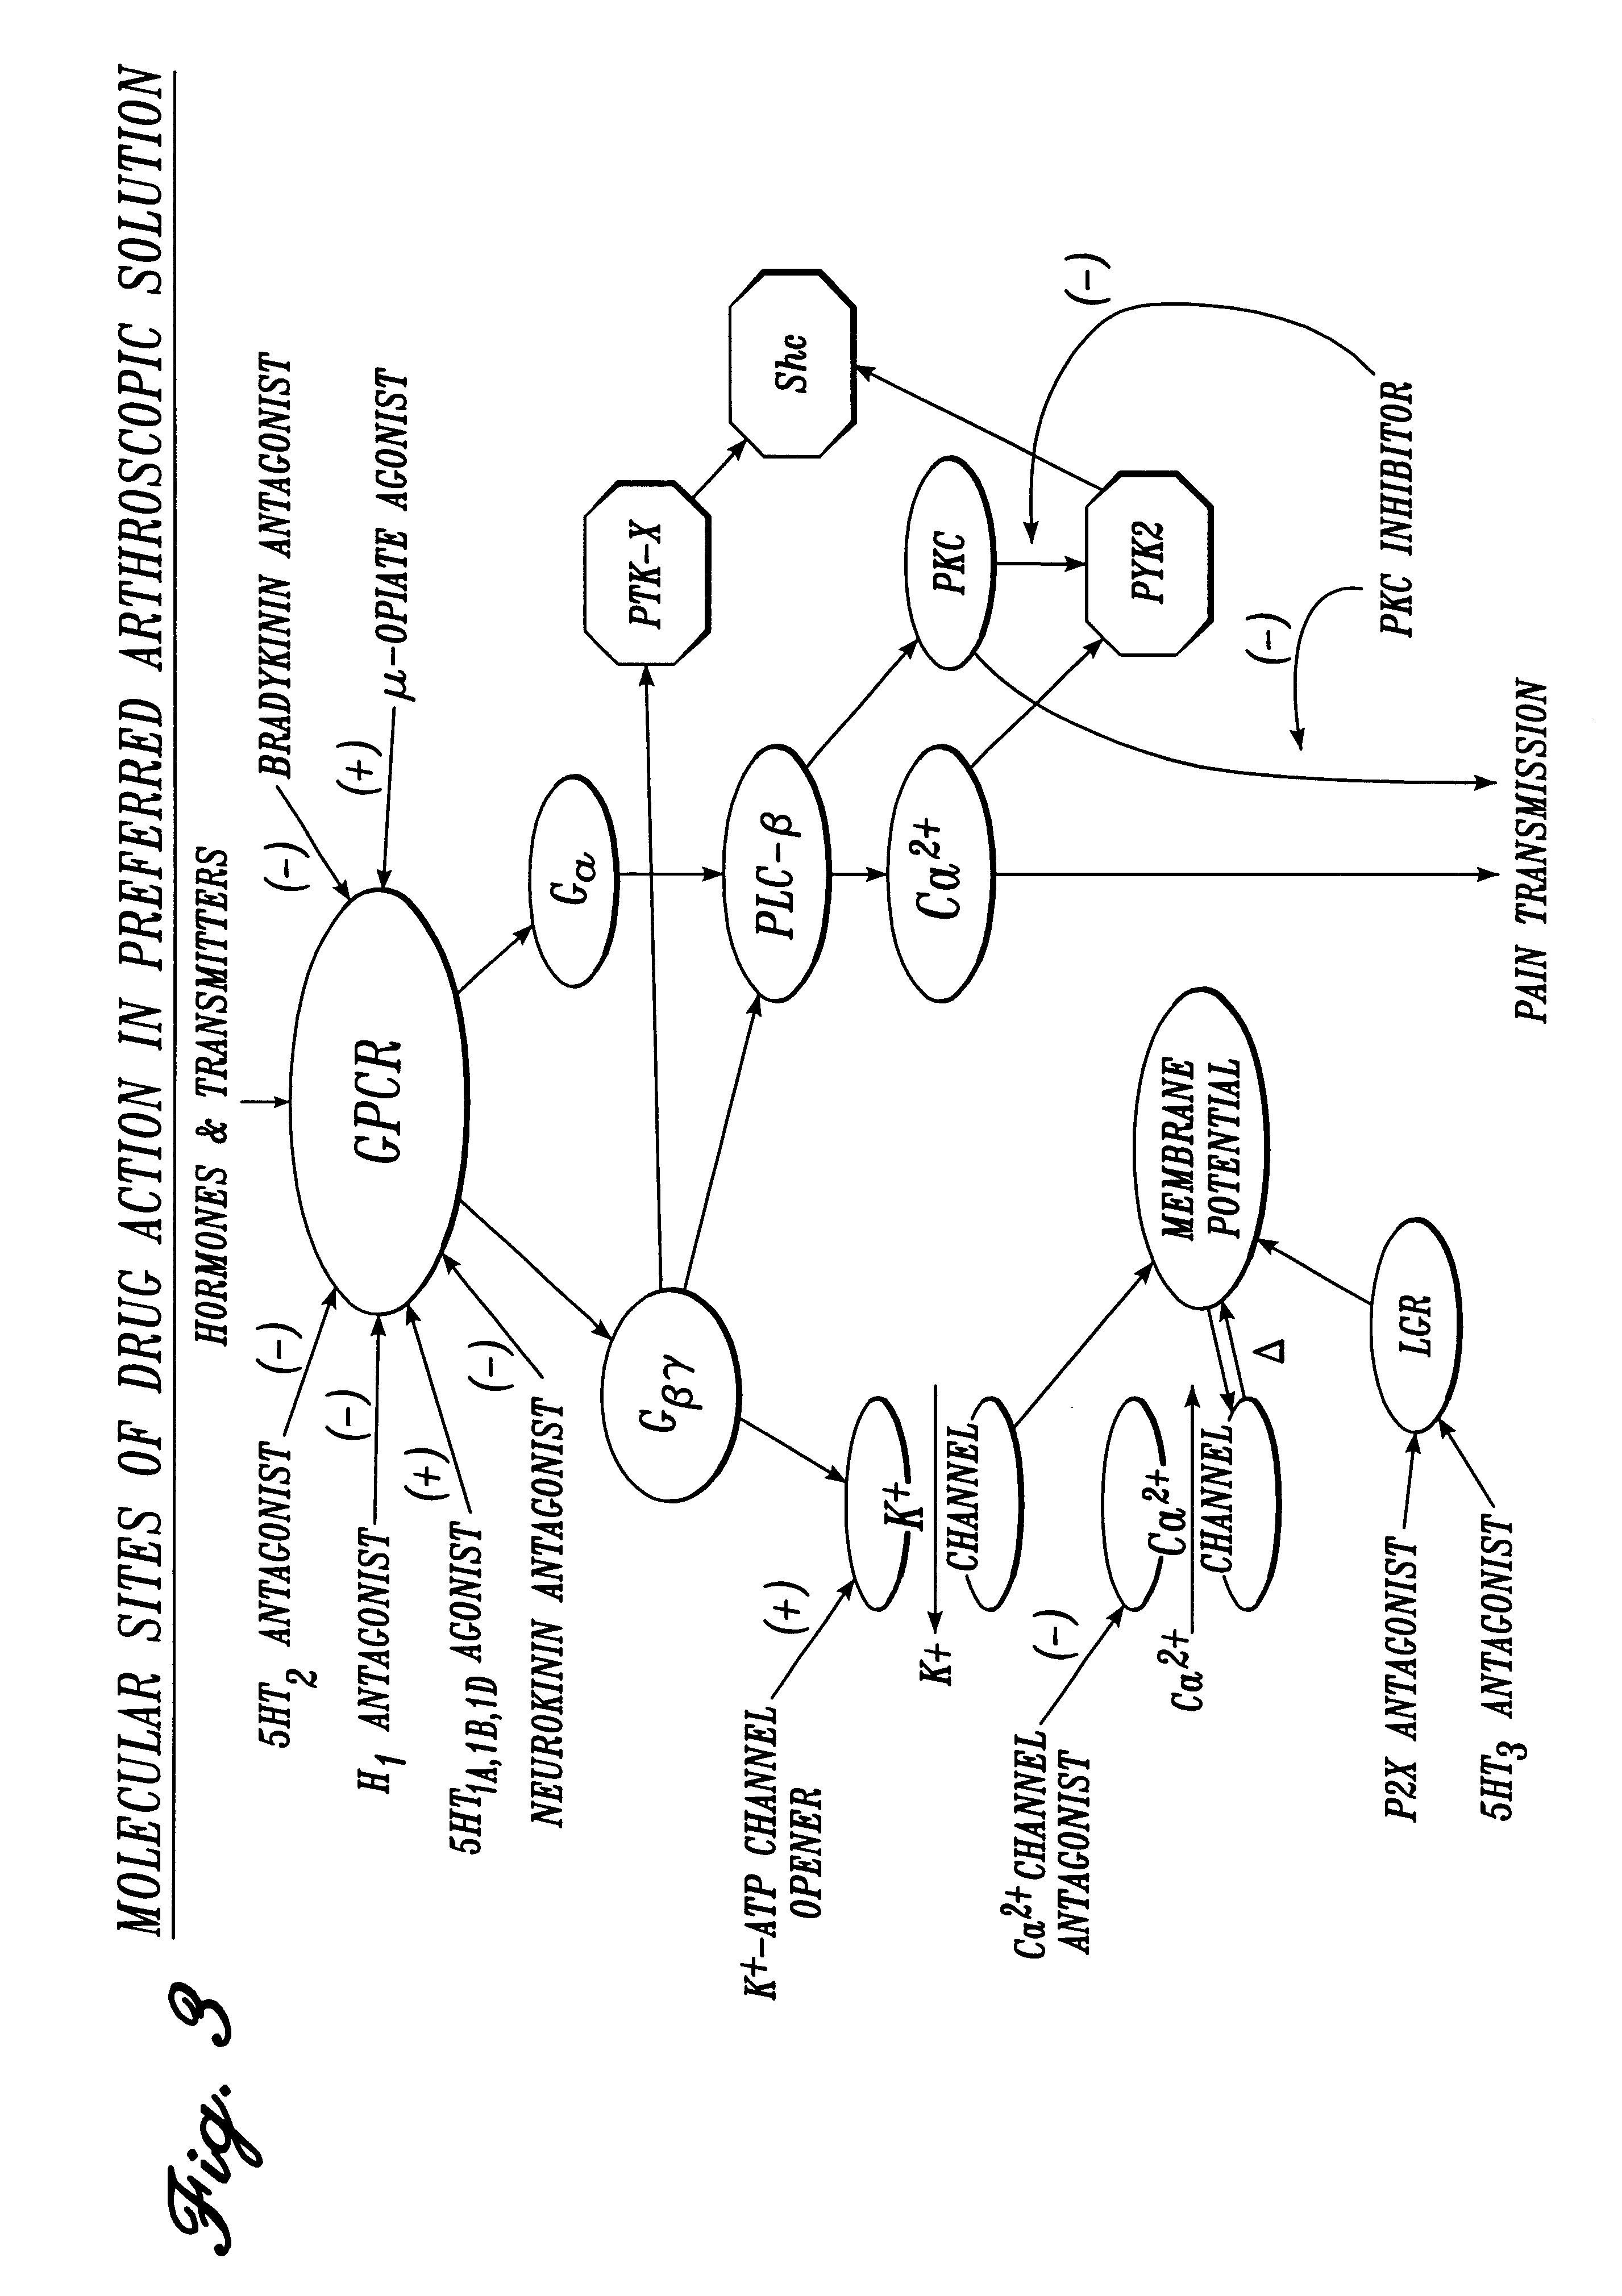 Irrigation solution and method for inhibition of pain, inflammation, spasm and restenosis